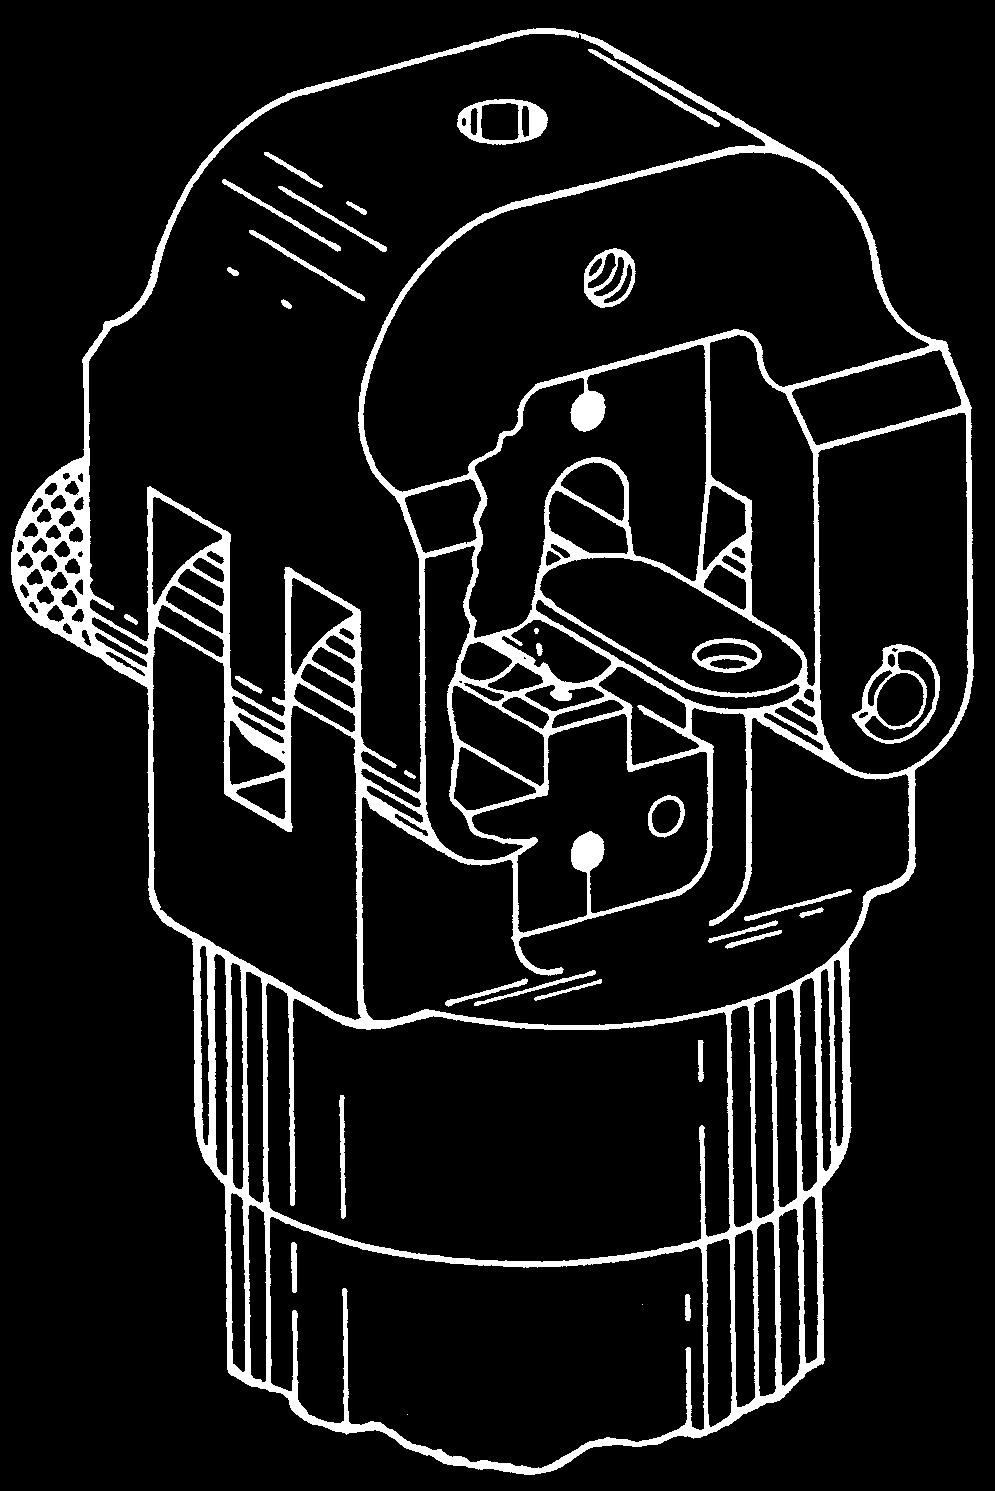 There are two approved methods for crimping the connectors with this hydraulic tool, on both terminals and splices. 4. Remove crimped terminal from the die assembly.